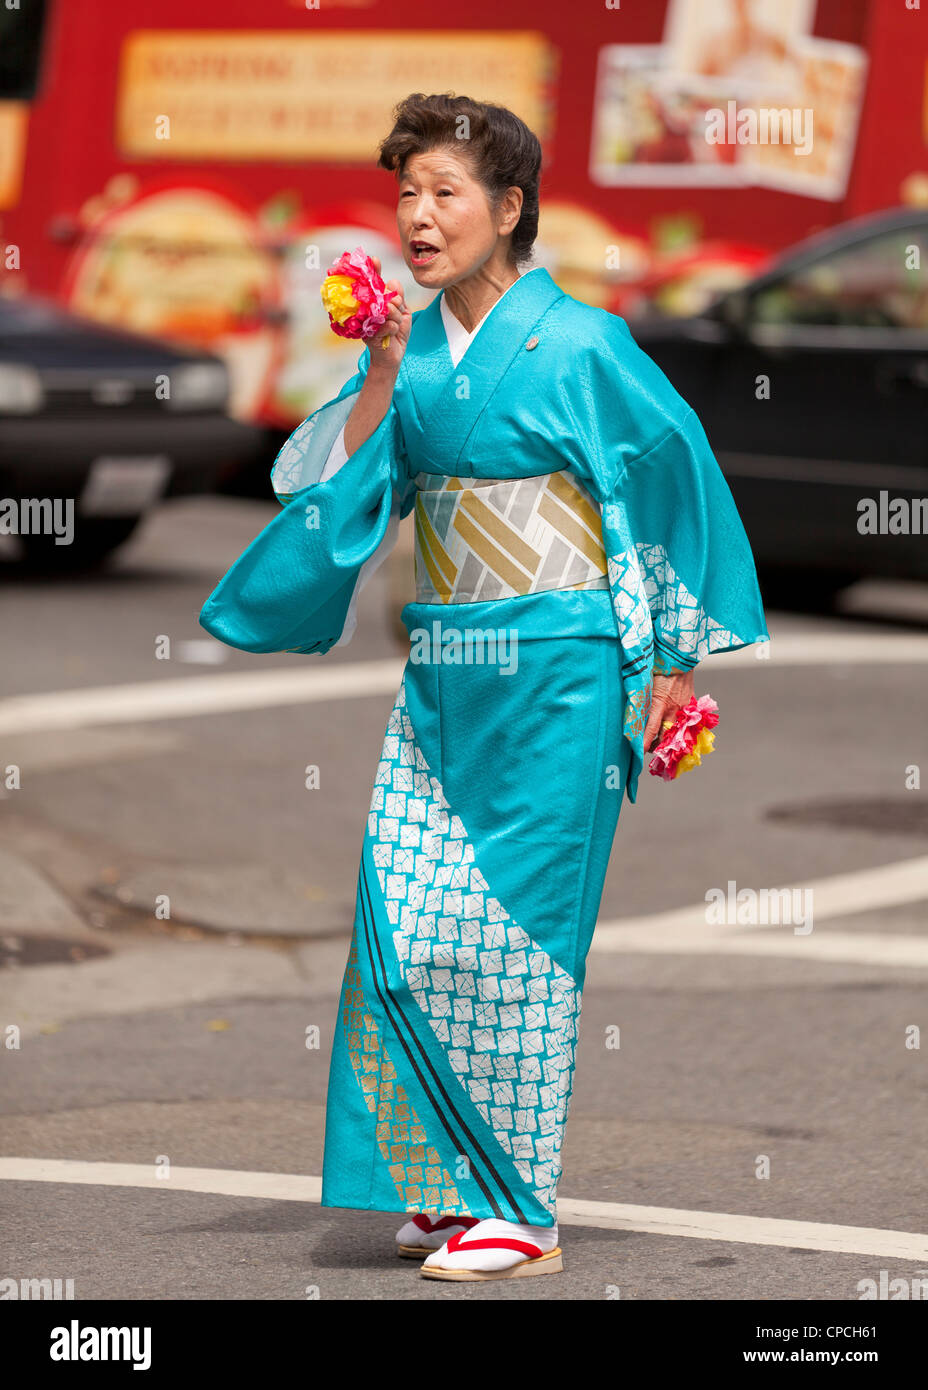 A middle aged Japanese woman wearing a kimono at a festival Stock Photo